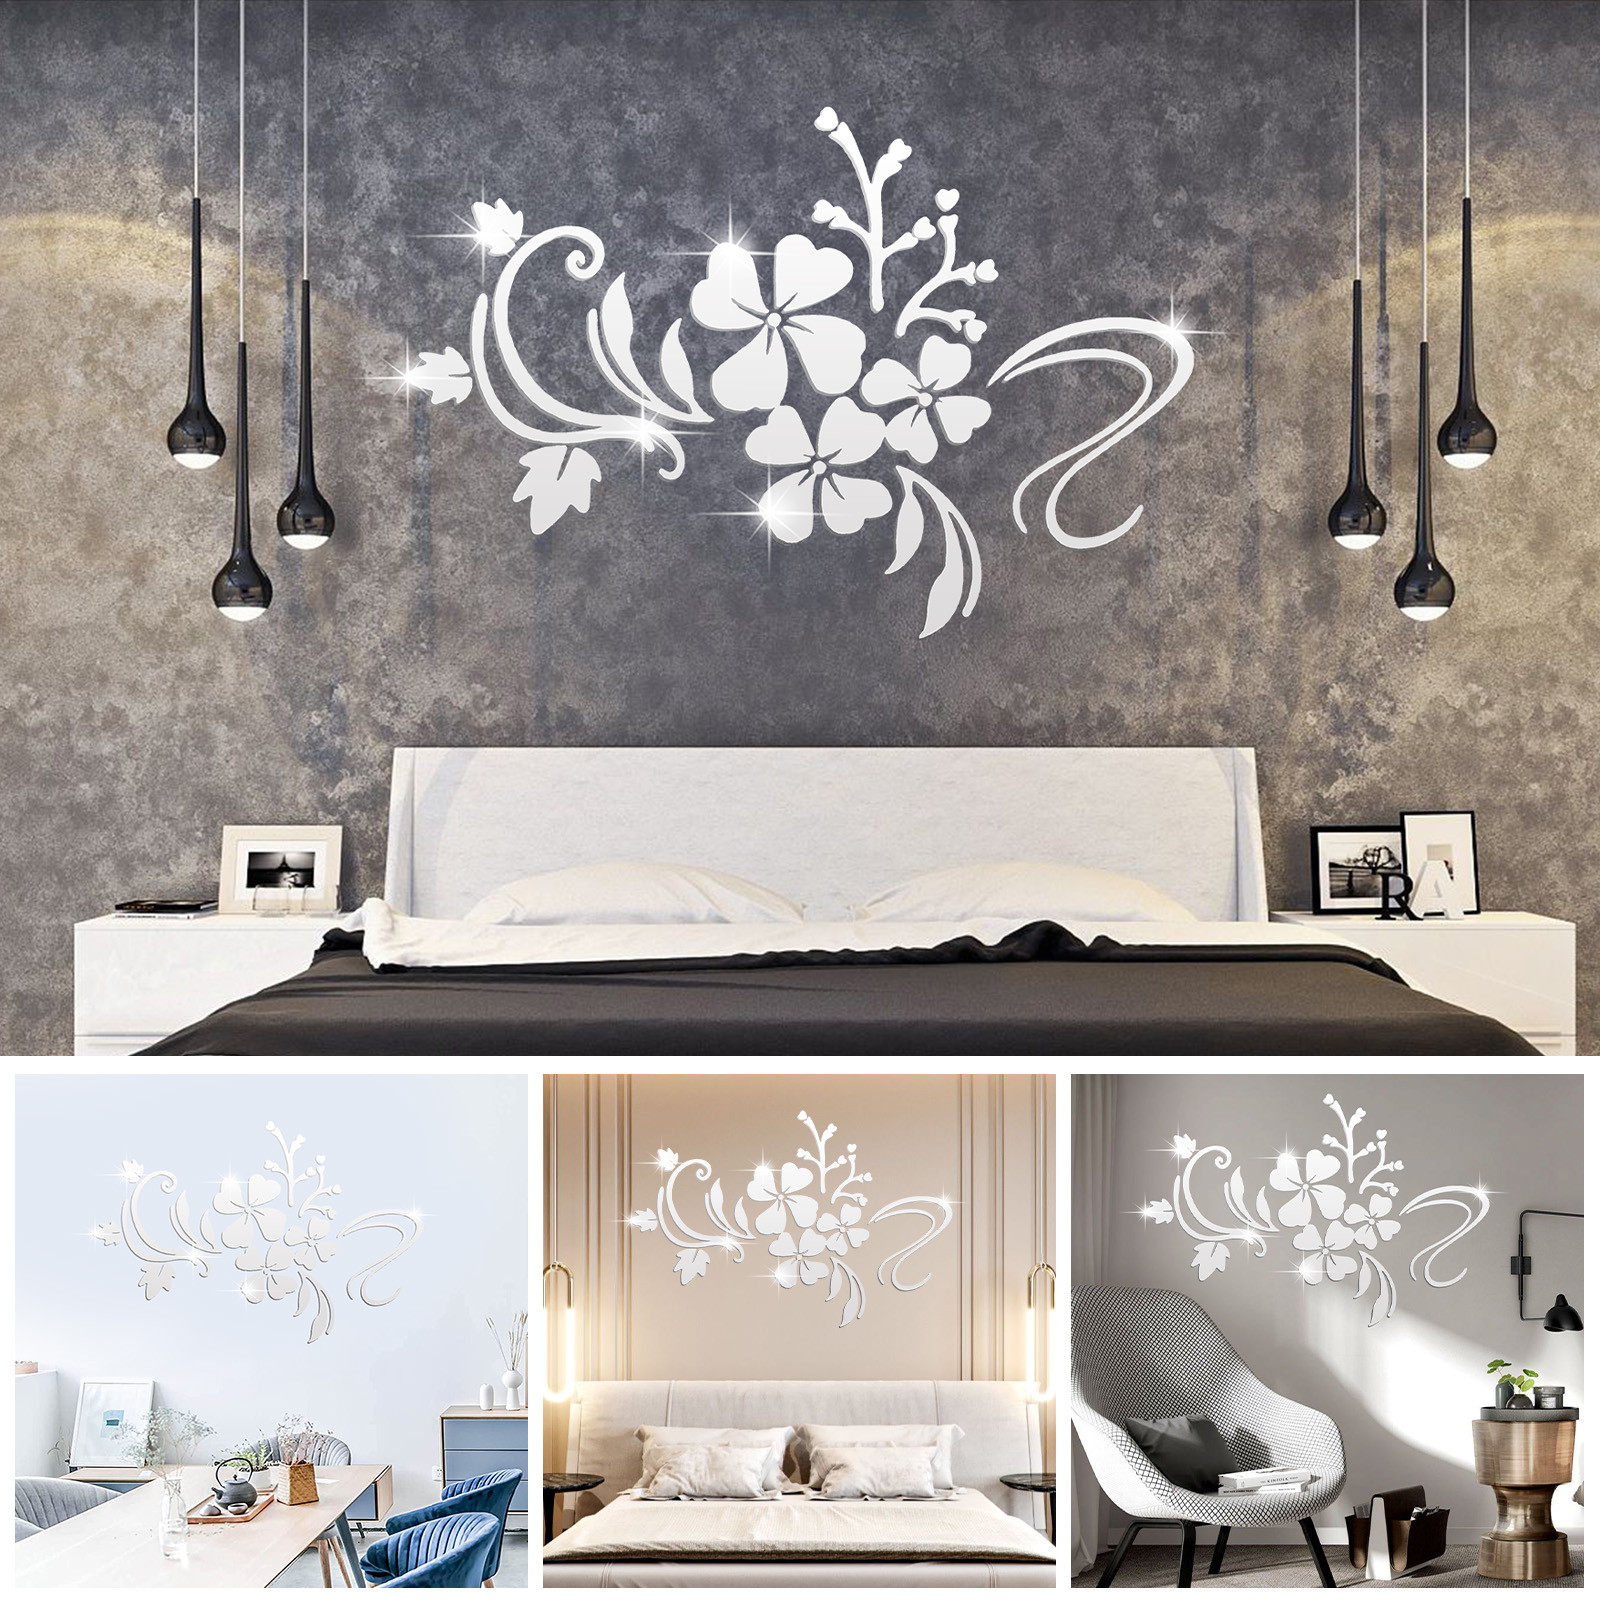 3D Mirror Tree Art Removable Wall Sticker Acrylic Mural Decal Home Room Decor US